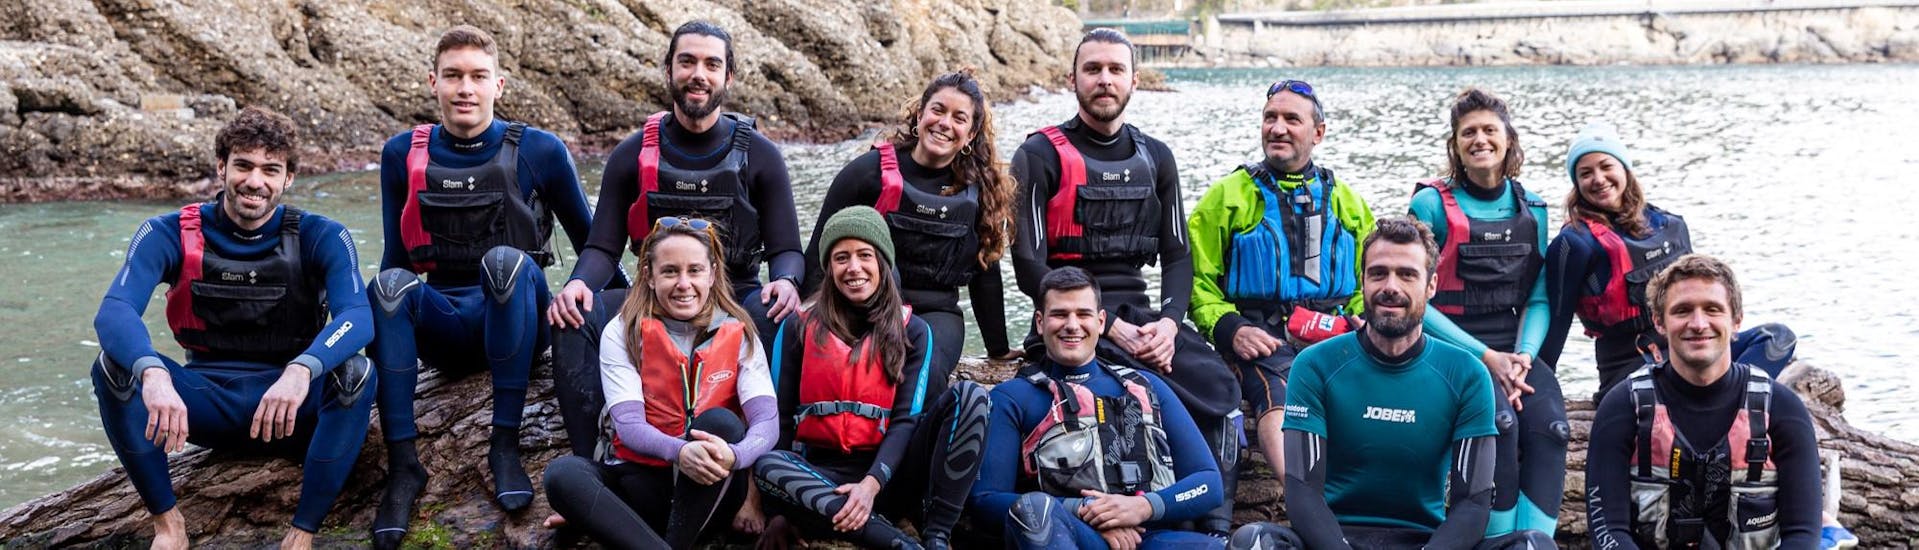 The instructors of Outdoor Portofino smiling while sitting together on a rock.